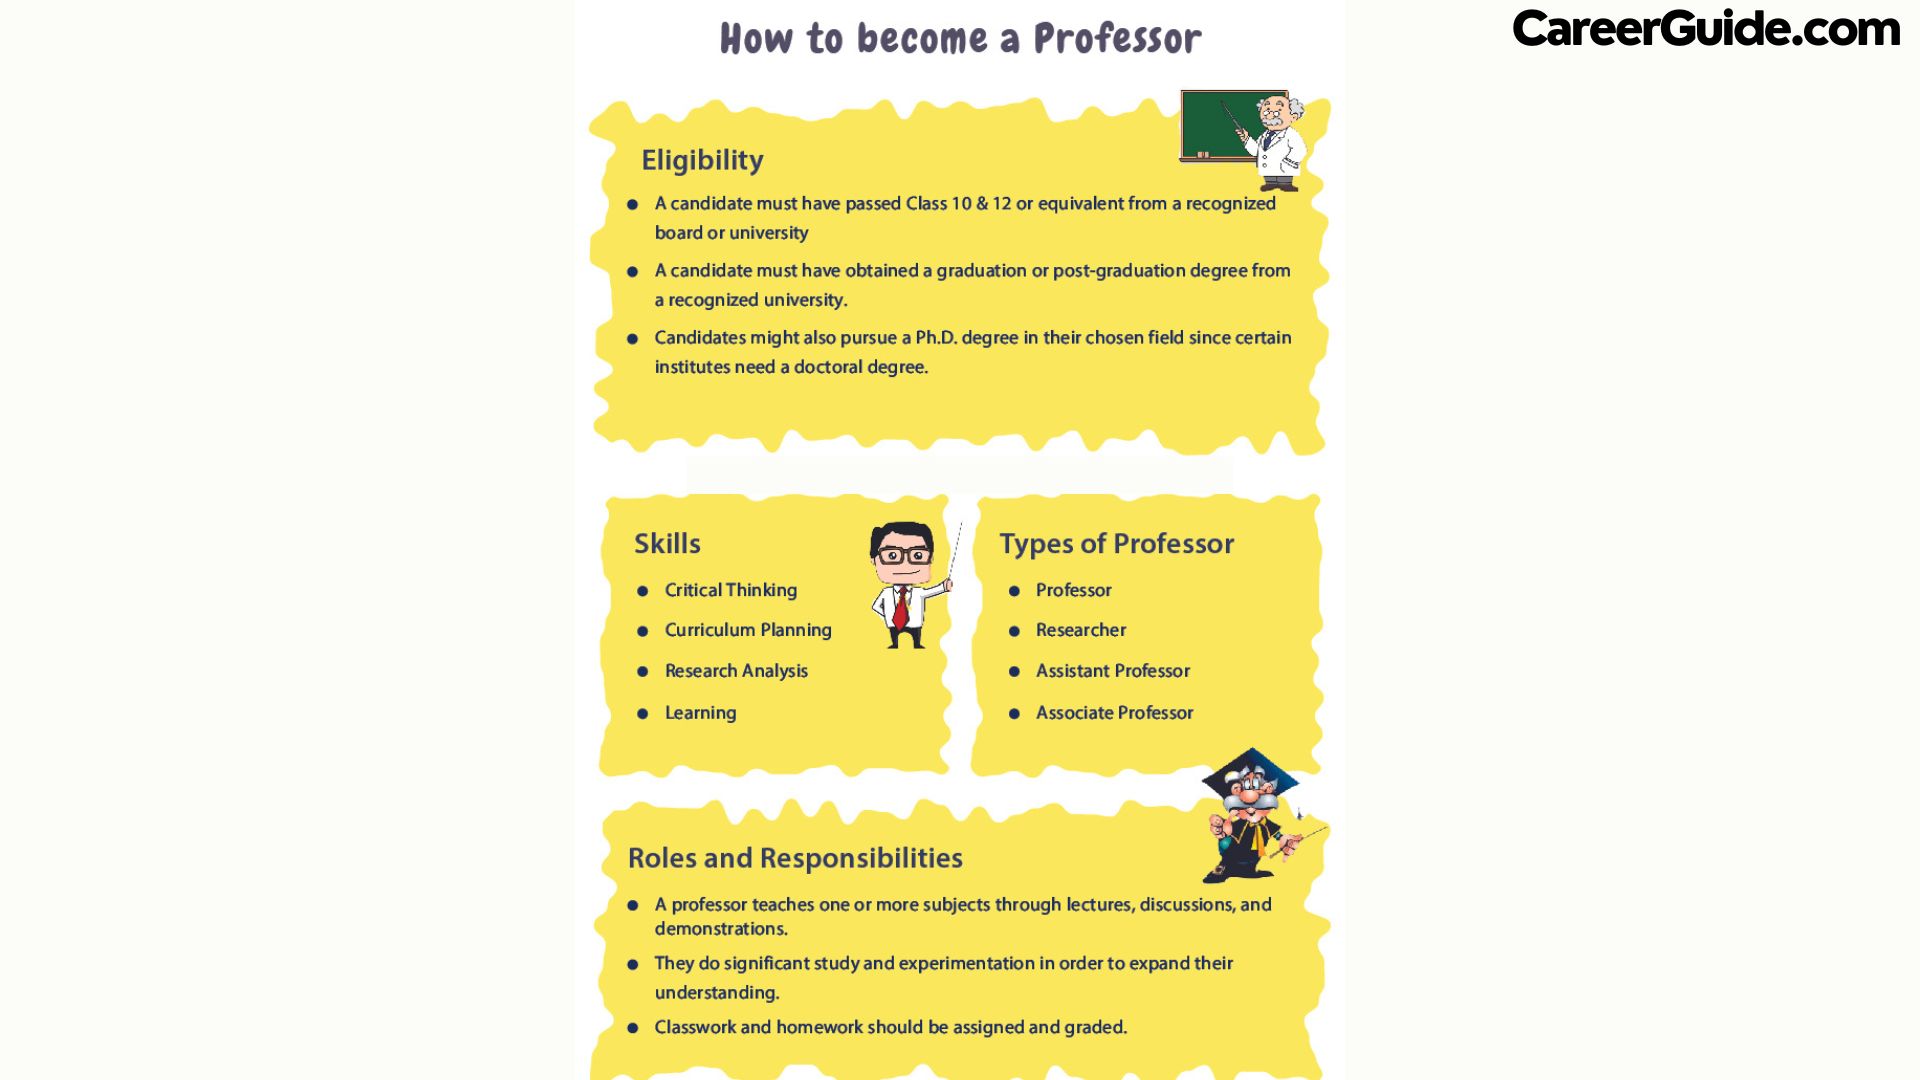  How to Become a Professor in government colleges